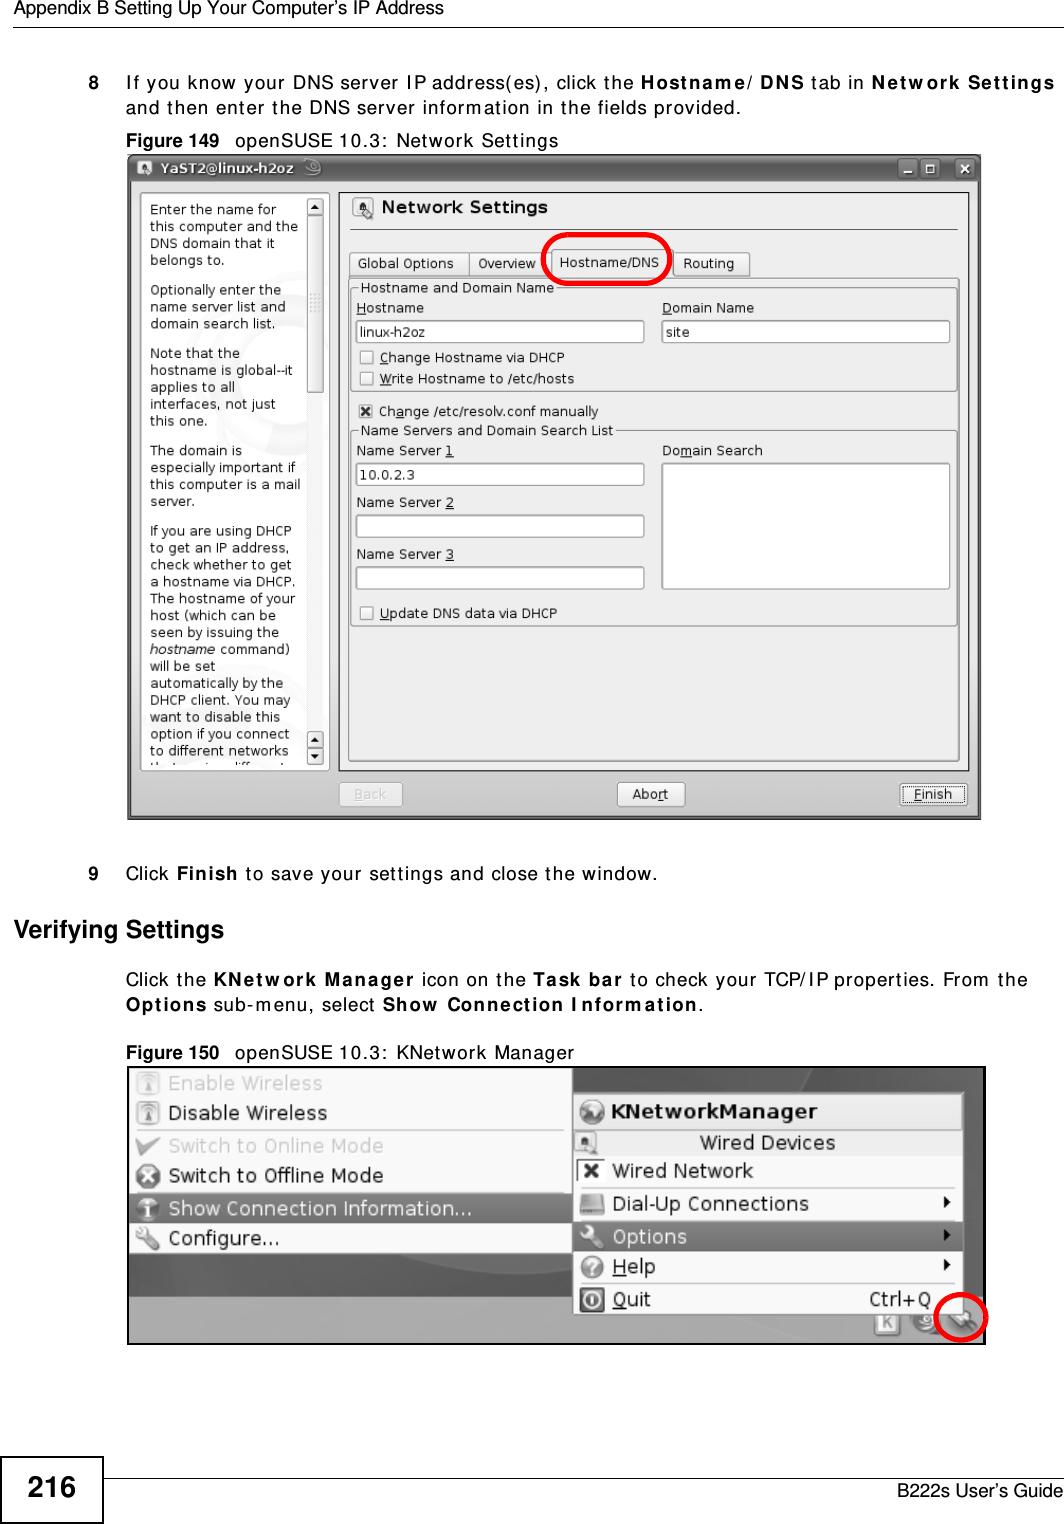 Appendix B Setting Up Your Computer’s IP AddressB222s User’s Guide2168I f you know your DNS server I P addr ess( es) , click the H ost n am e / D N S tab in N et w or k  Set tings and t hen ent er t he DNS server inform at ion in the fields provided.Figure 149   openSUSE 10.3:  Net work Sett ings9Click Finish t o save your sett ings and close t he window.Verifying SettingsClick t he KN et w or k Ma na ger icon on the Ta sk  ba r  t o check your TCP/ I P propert ies. From  t he Opt io ns sub-m enu, select  Show  Conne ct ion I nfor m at ion.Figure 150   openSUSE 10.3:  KNet work Manager